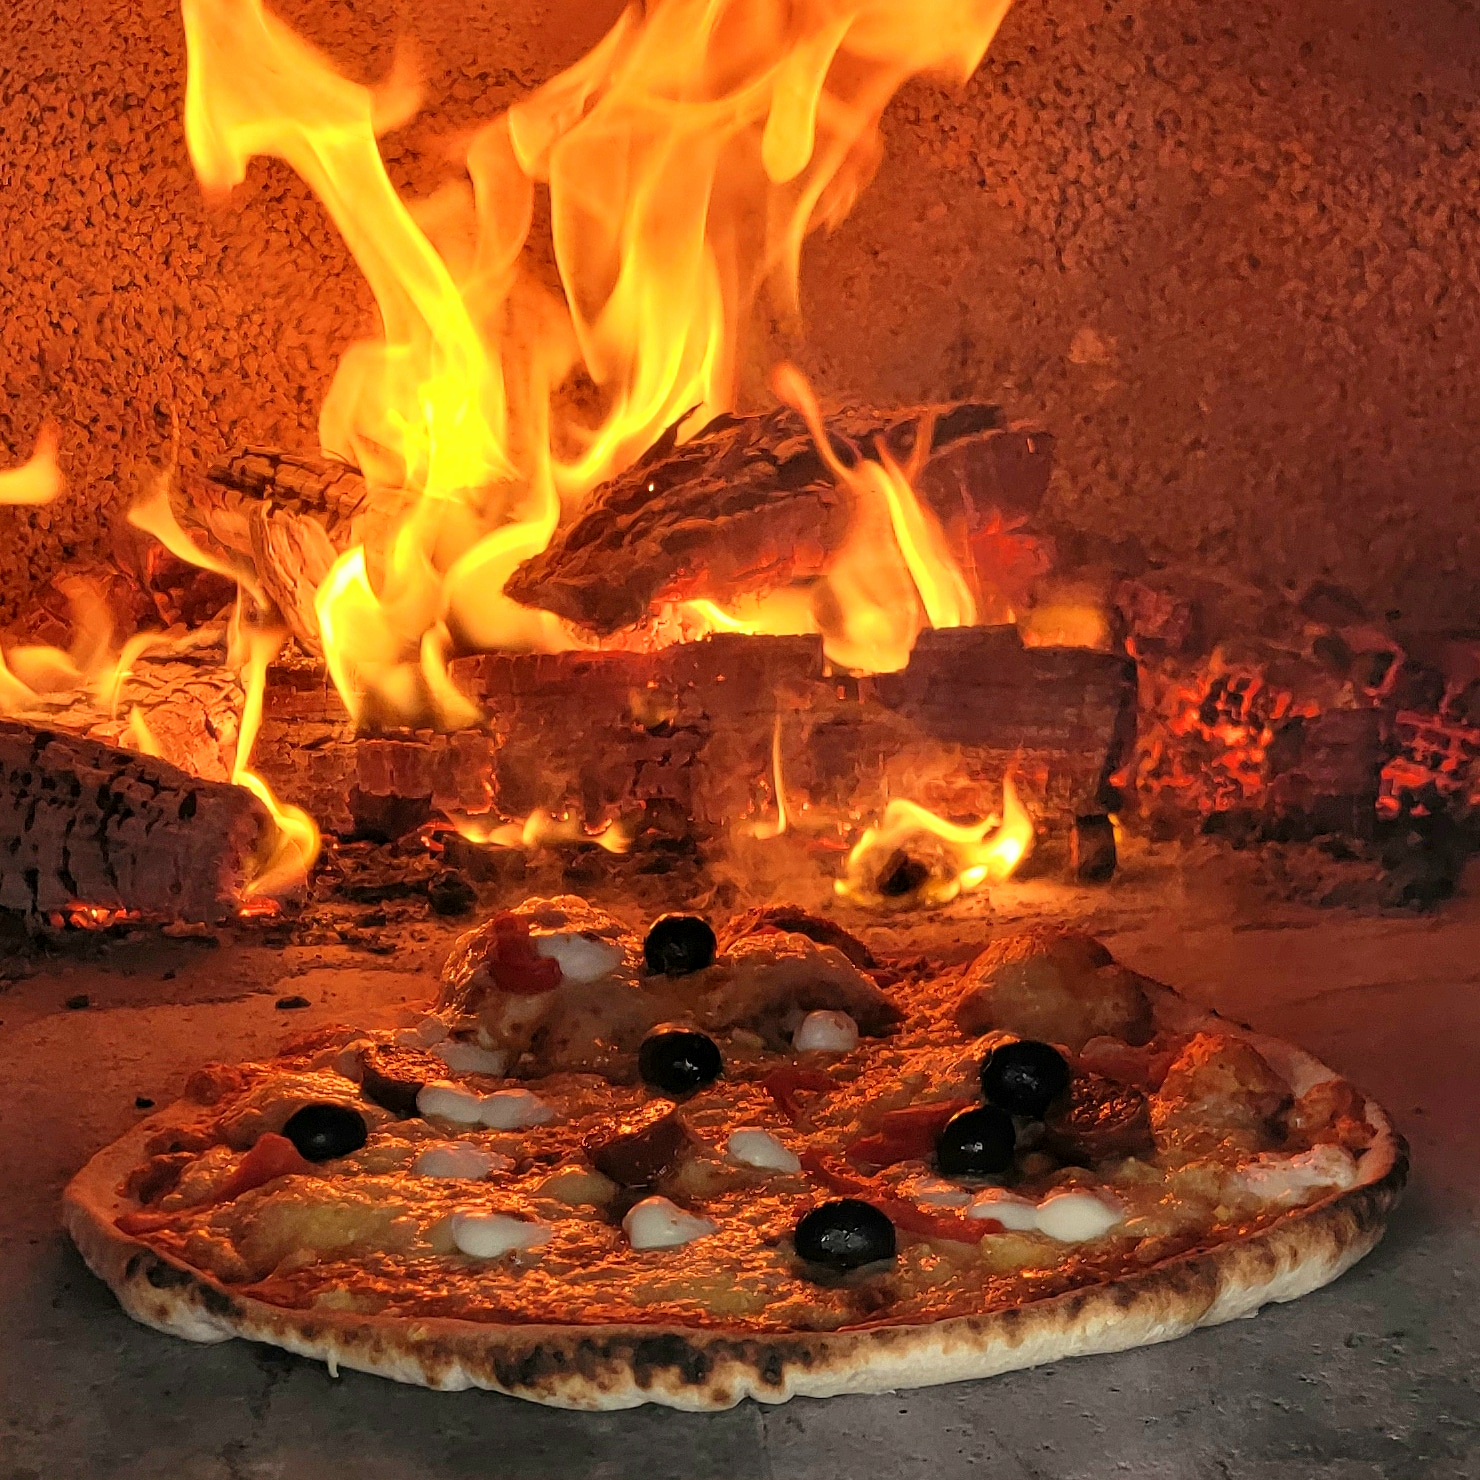 Home made pizzas from Epicureans of Florida - Private chef fort Lauderdale | Private chef Miami | Luxury Catering Miami | Private catering Fort Lauderdale | Personal chef Miami | Private chef near me | Home chef